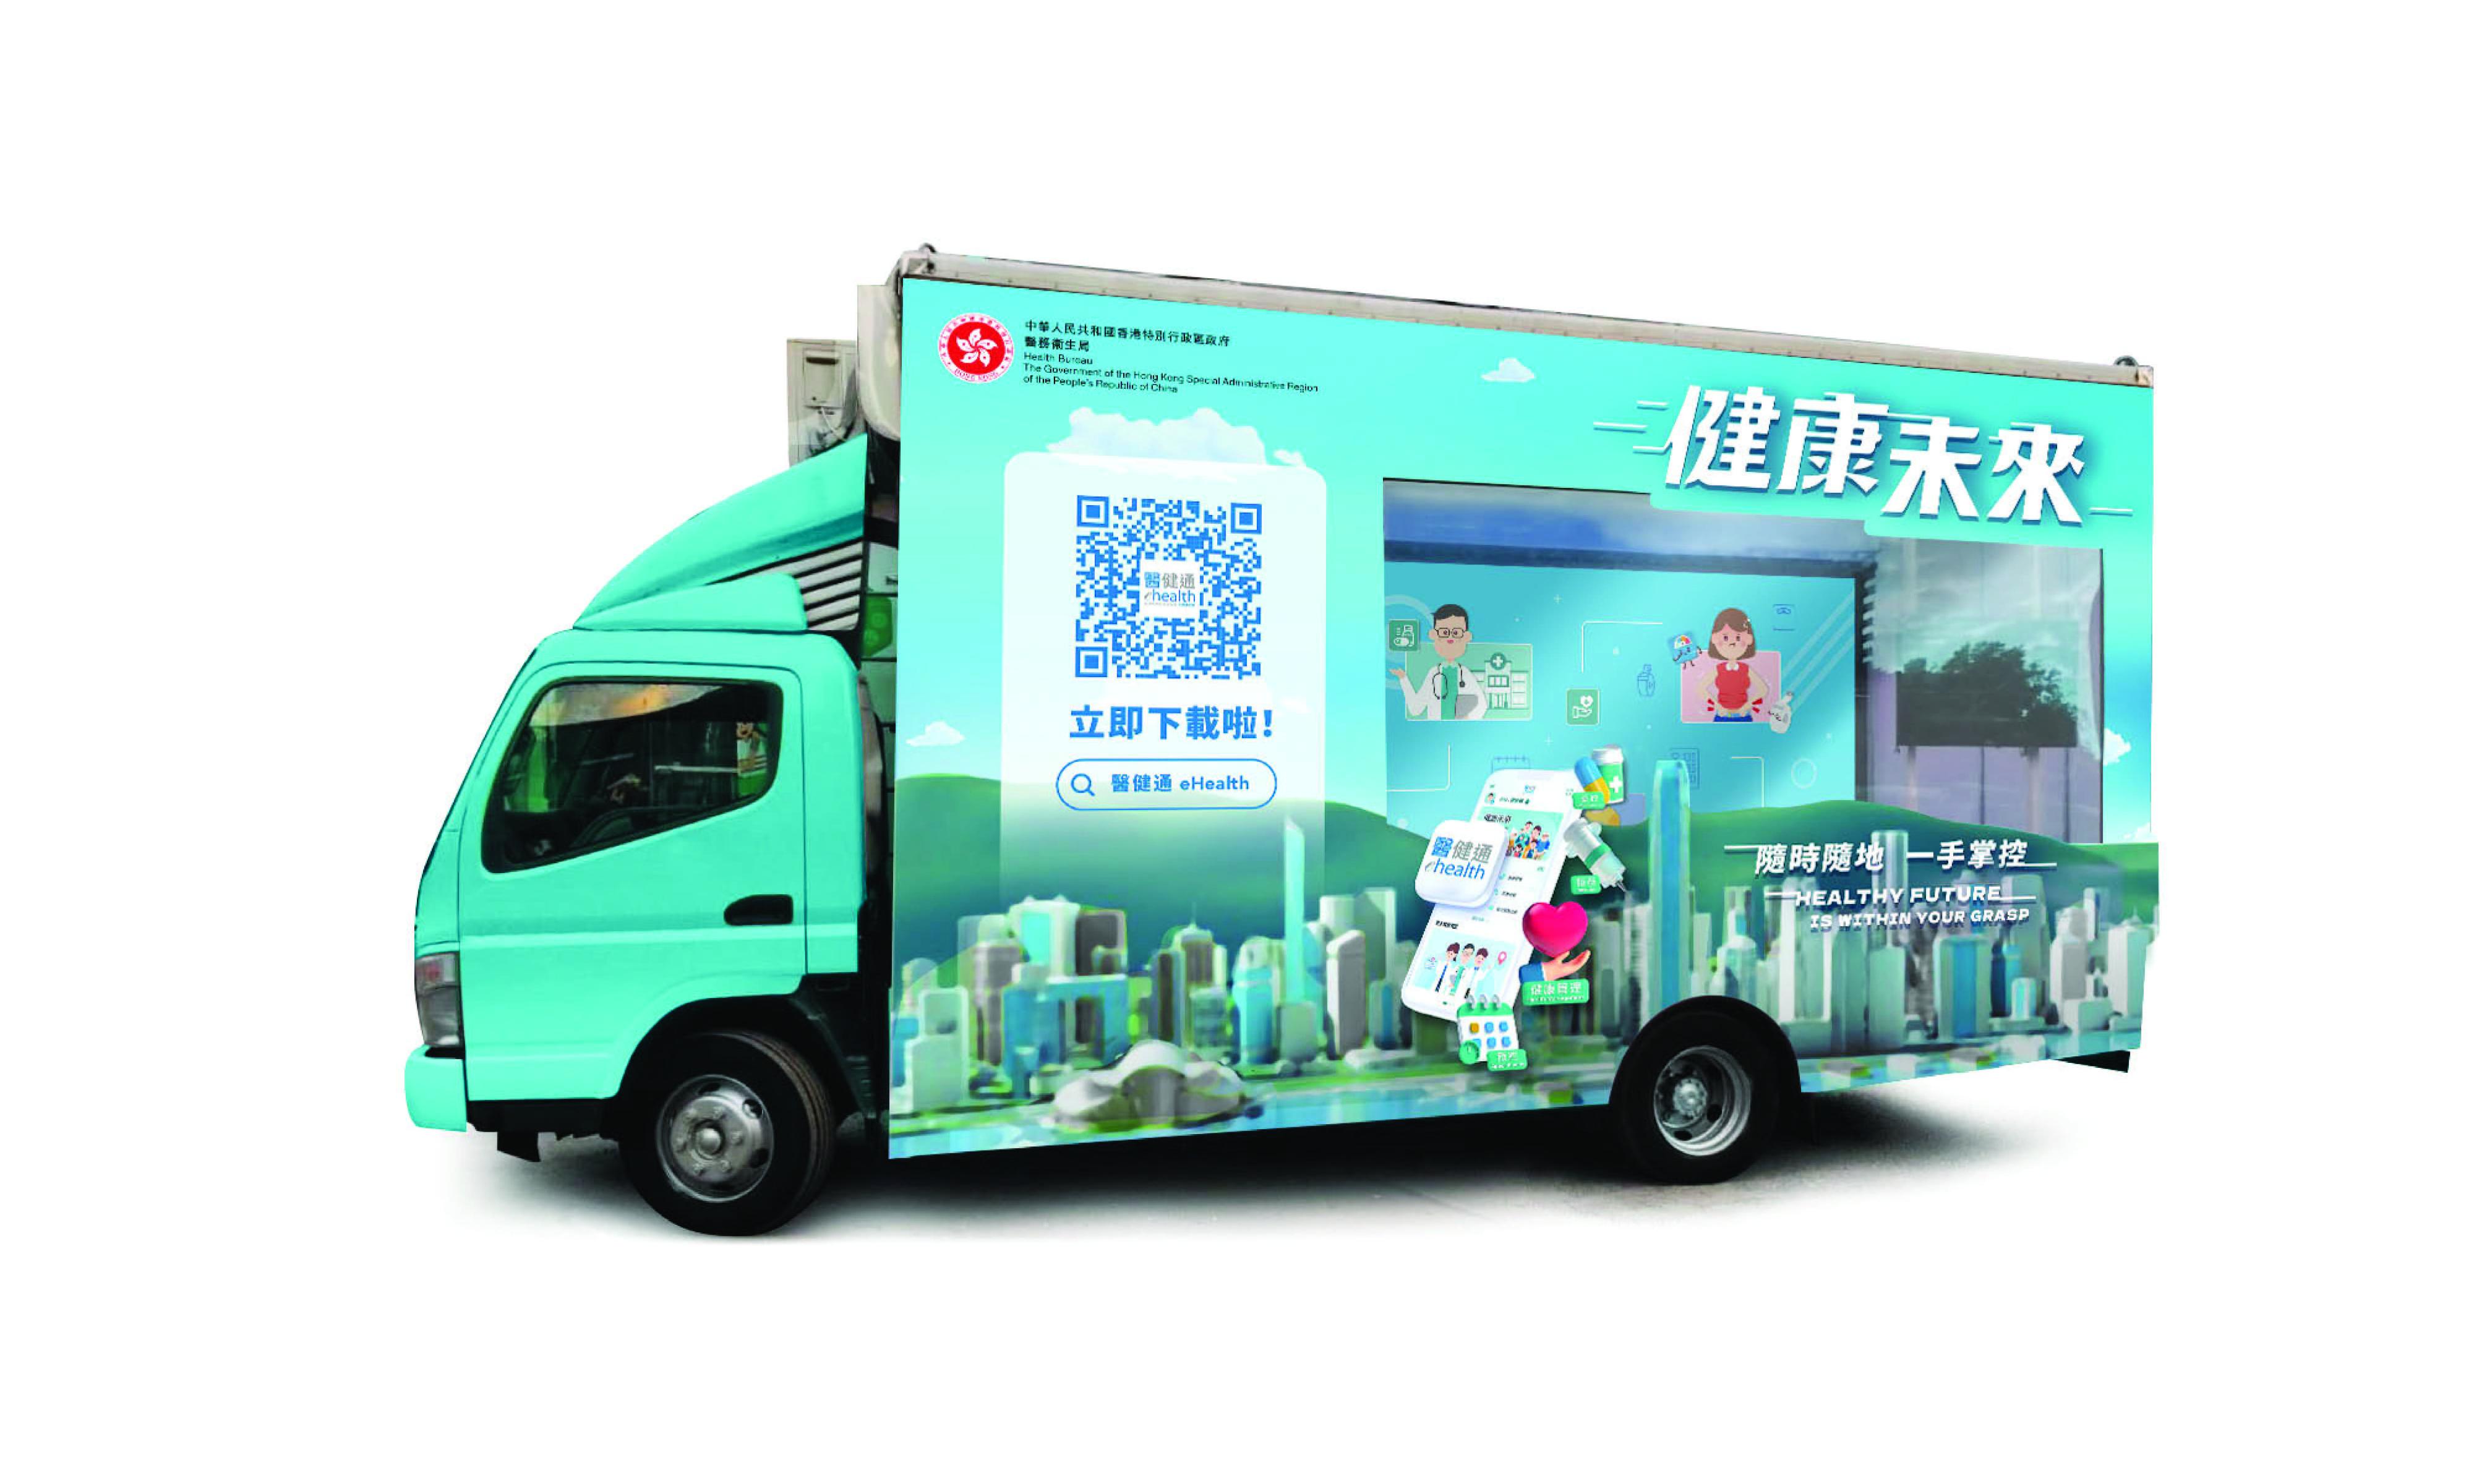 The Health Bureau rolled out a fresh round of publicity for eHealth today (June 15) to call on members of the public to make the best use of the eHealth mobile application for managing health condition of their own and that of their family members. A mobile truck “Mobile Health Station” will tour various locations across Hong Kong from this Saturday (June 17) till the end of this month to assist members of the public to register with eHealth and download the mobile application.